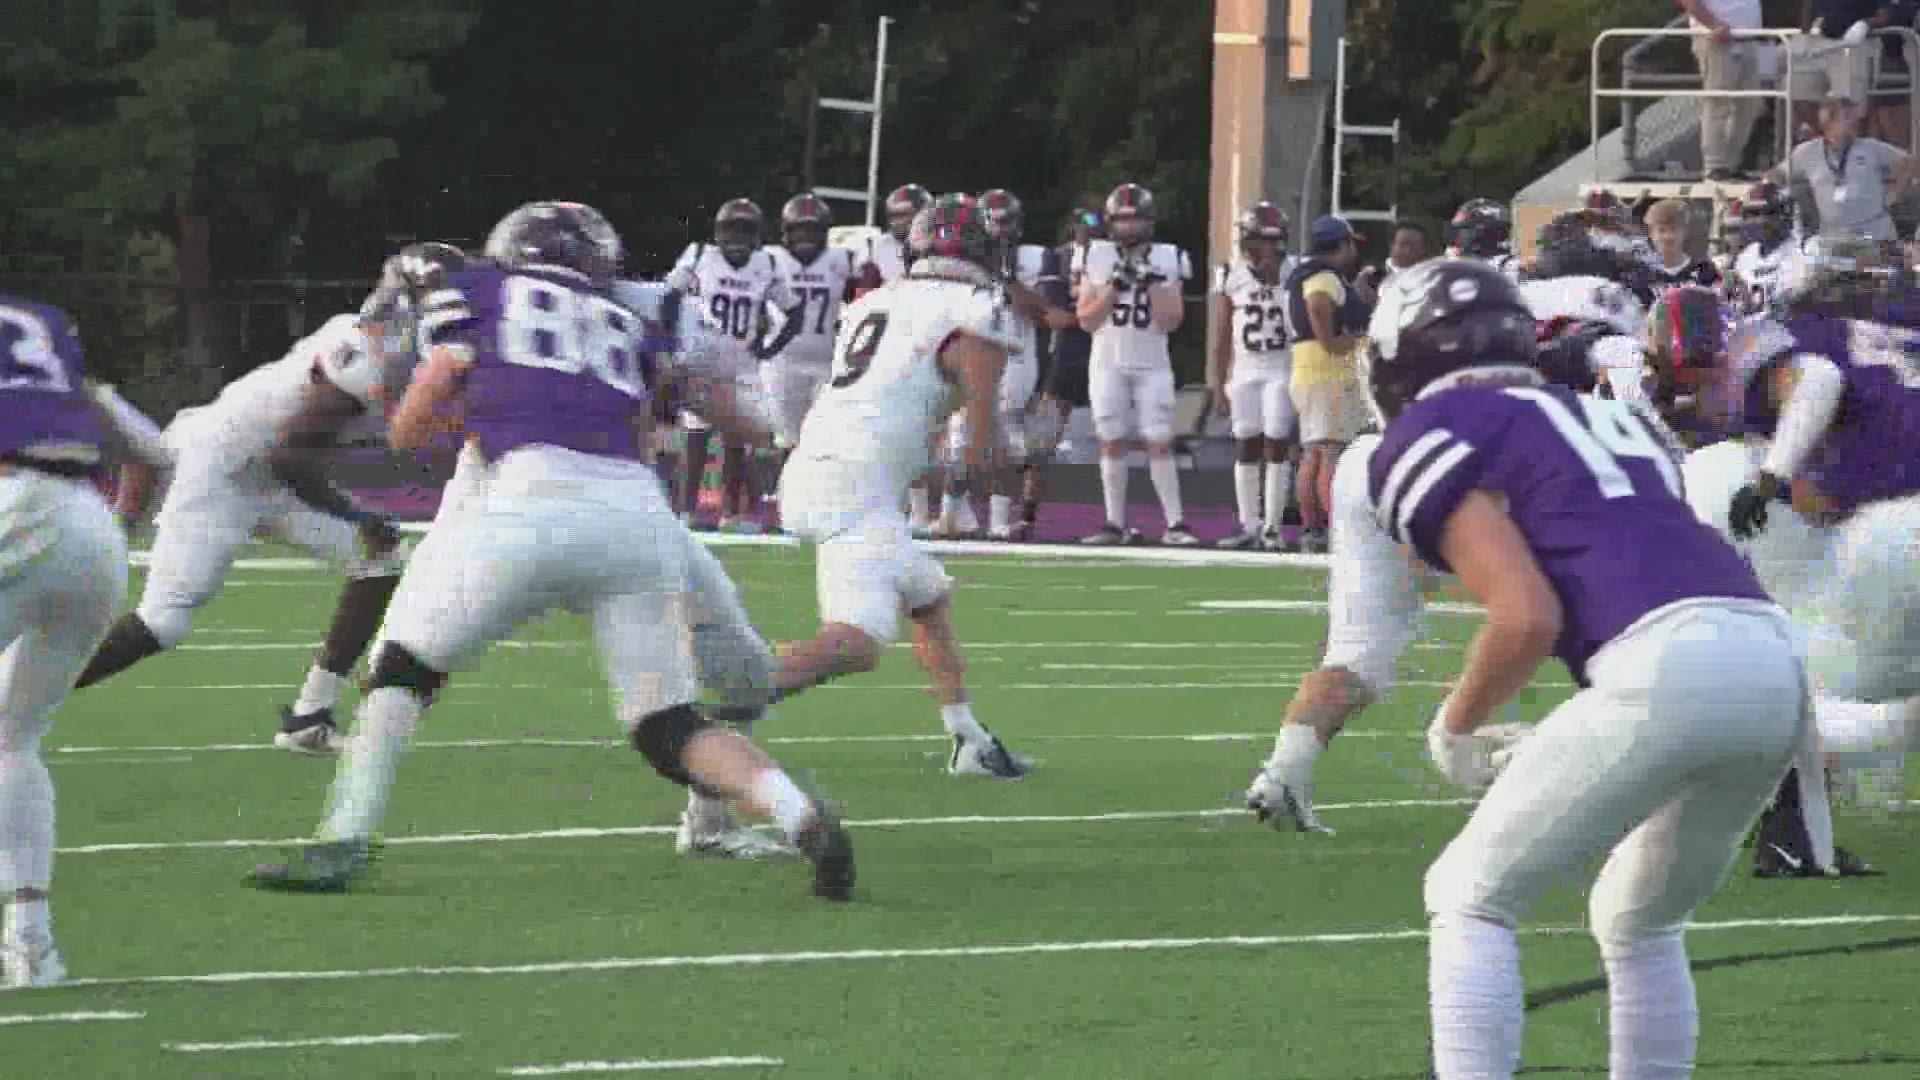 Sevier County was demolished in Friday night's game, 49-0.